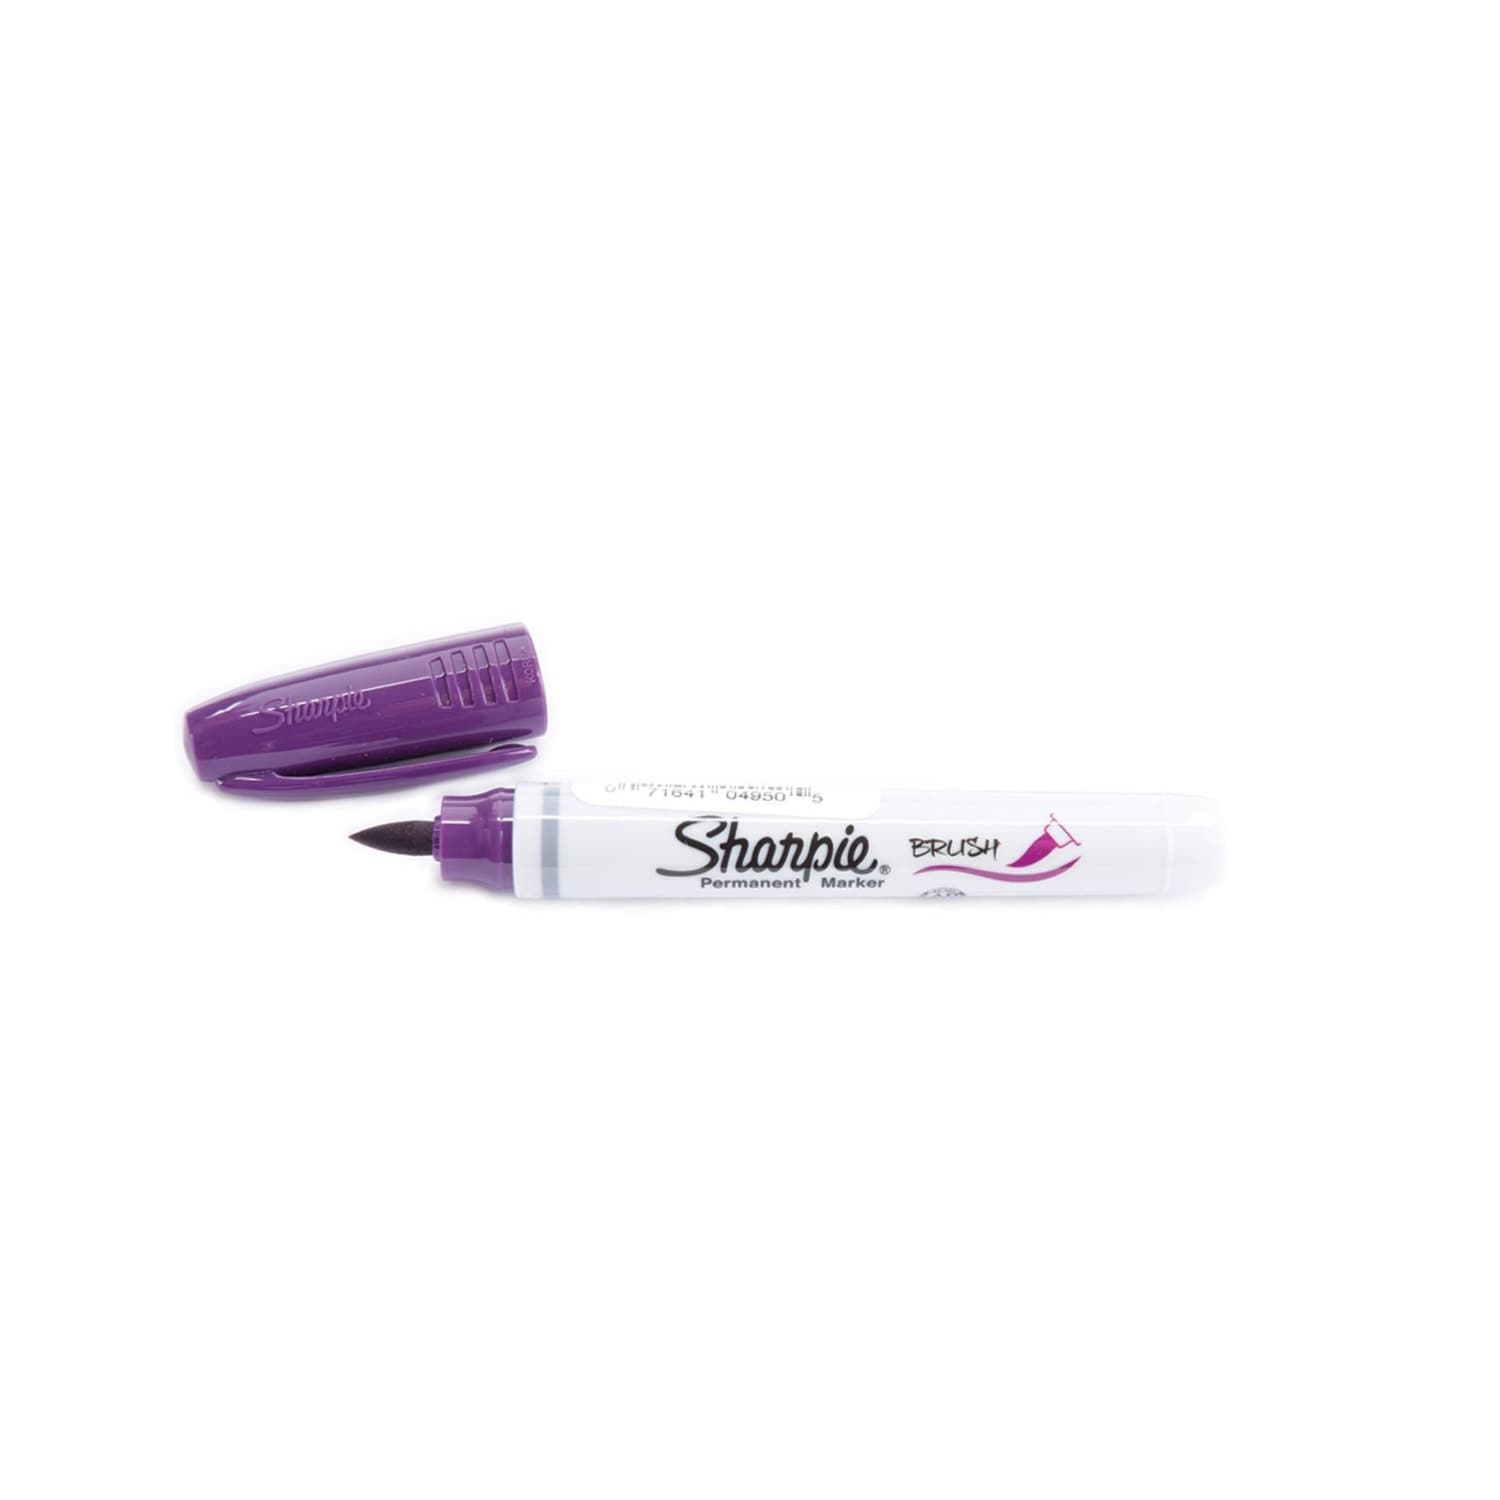 Sharpie Brush Tip Markers Berry, Pack of 3 